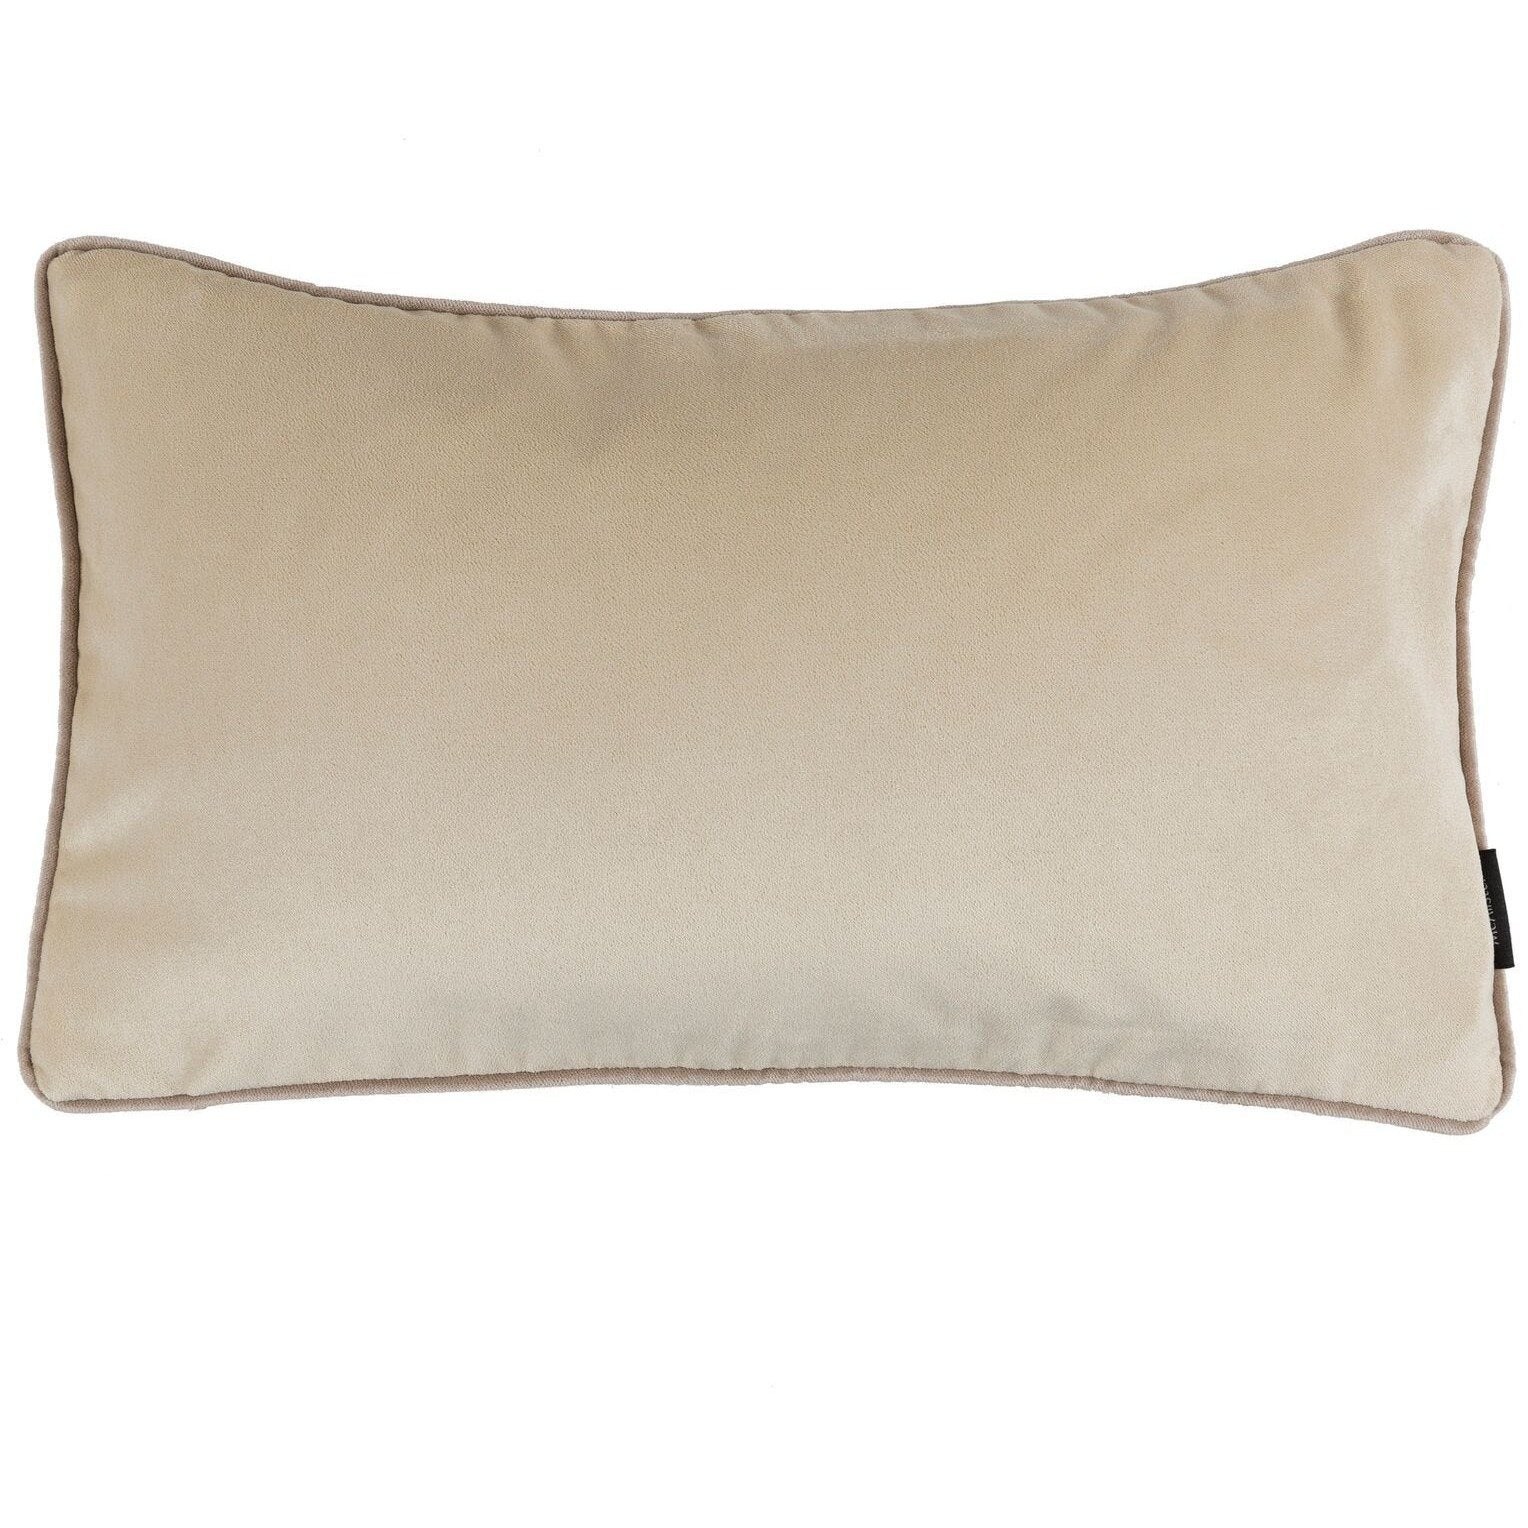 McAlister Textiles Matt Champagne Gold Velvet Cushion Cushions and Covers Cover Only 50cm x 30cm 